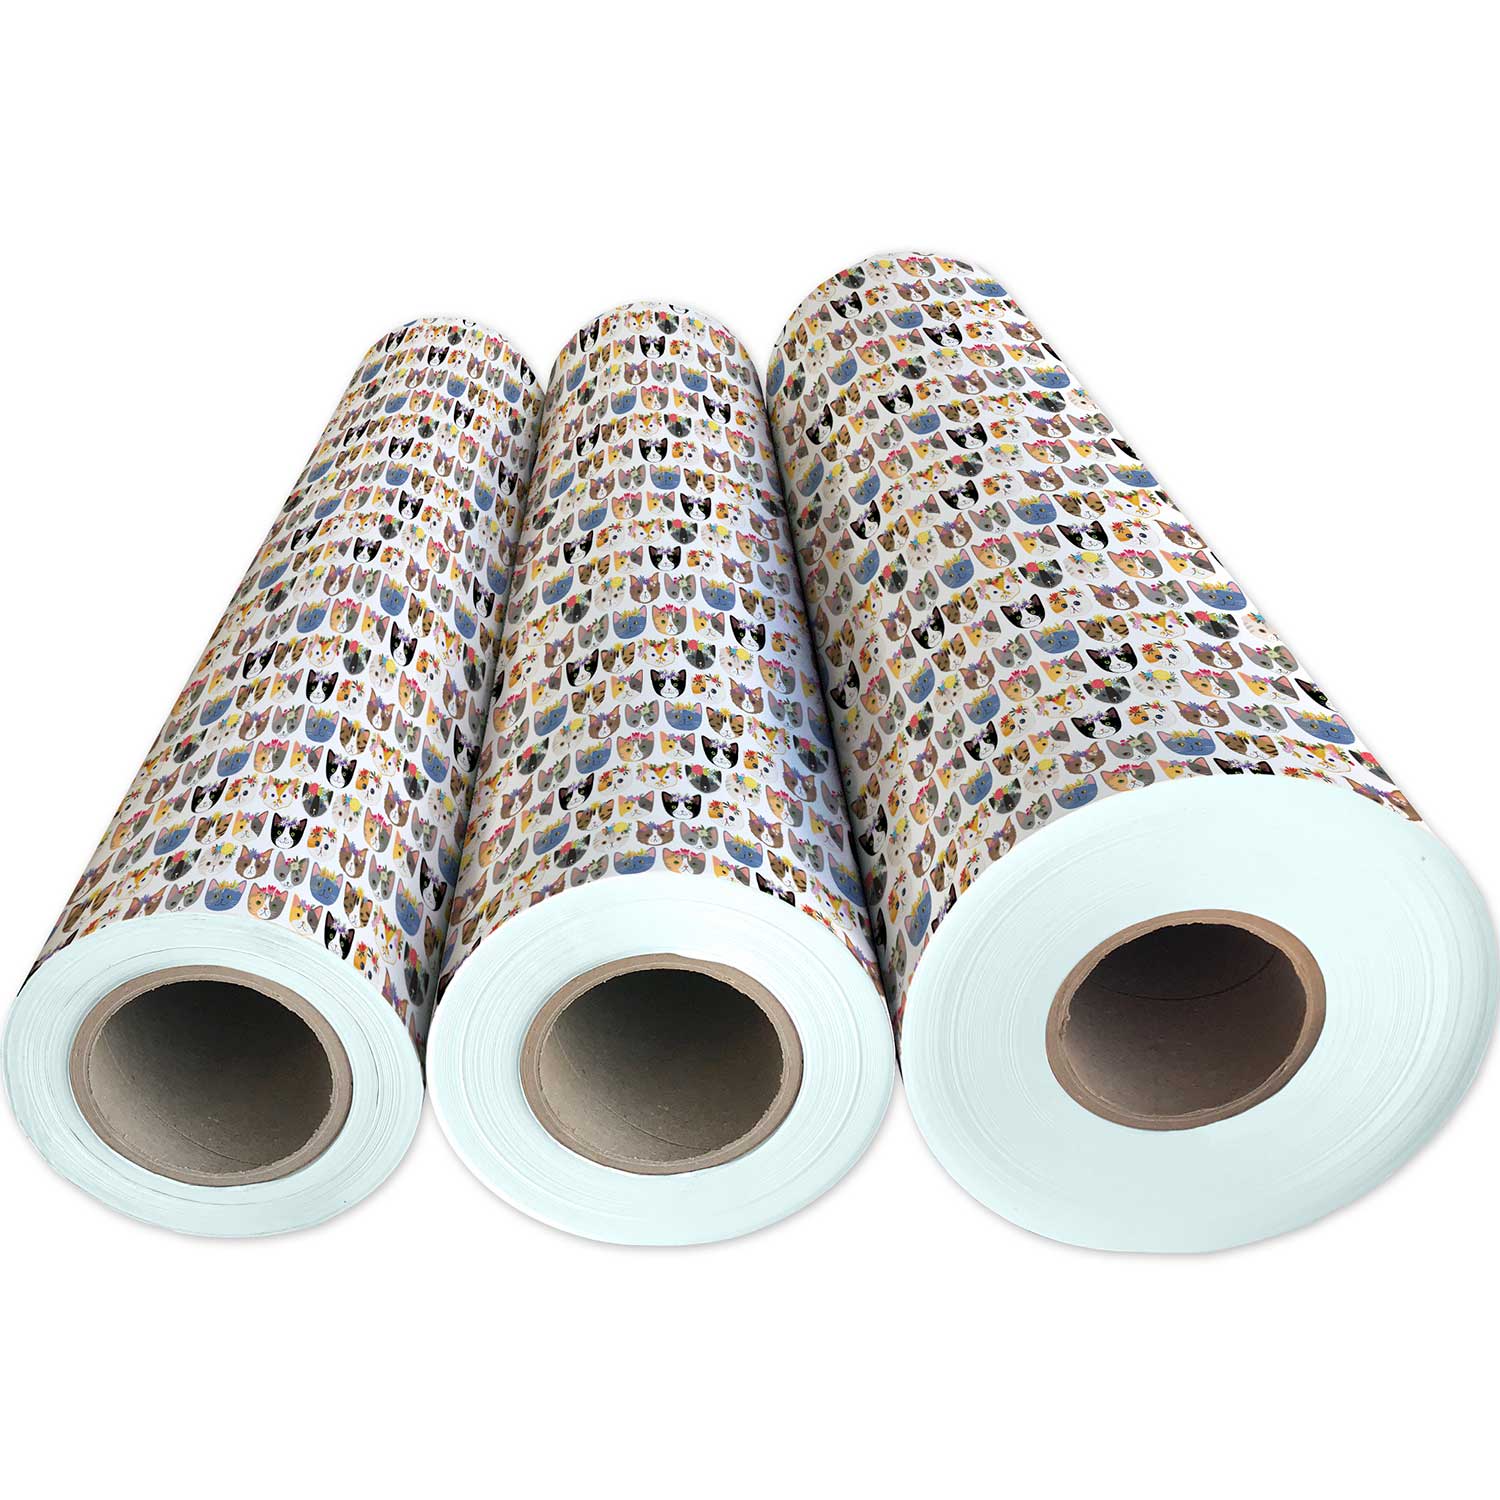 GRAPHICS & MORE Premium Gift Wrap Wrapping Paper Roll Pattern - Paw Print  Artsy Cat Dog - Blue